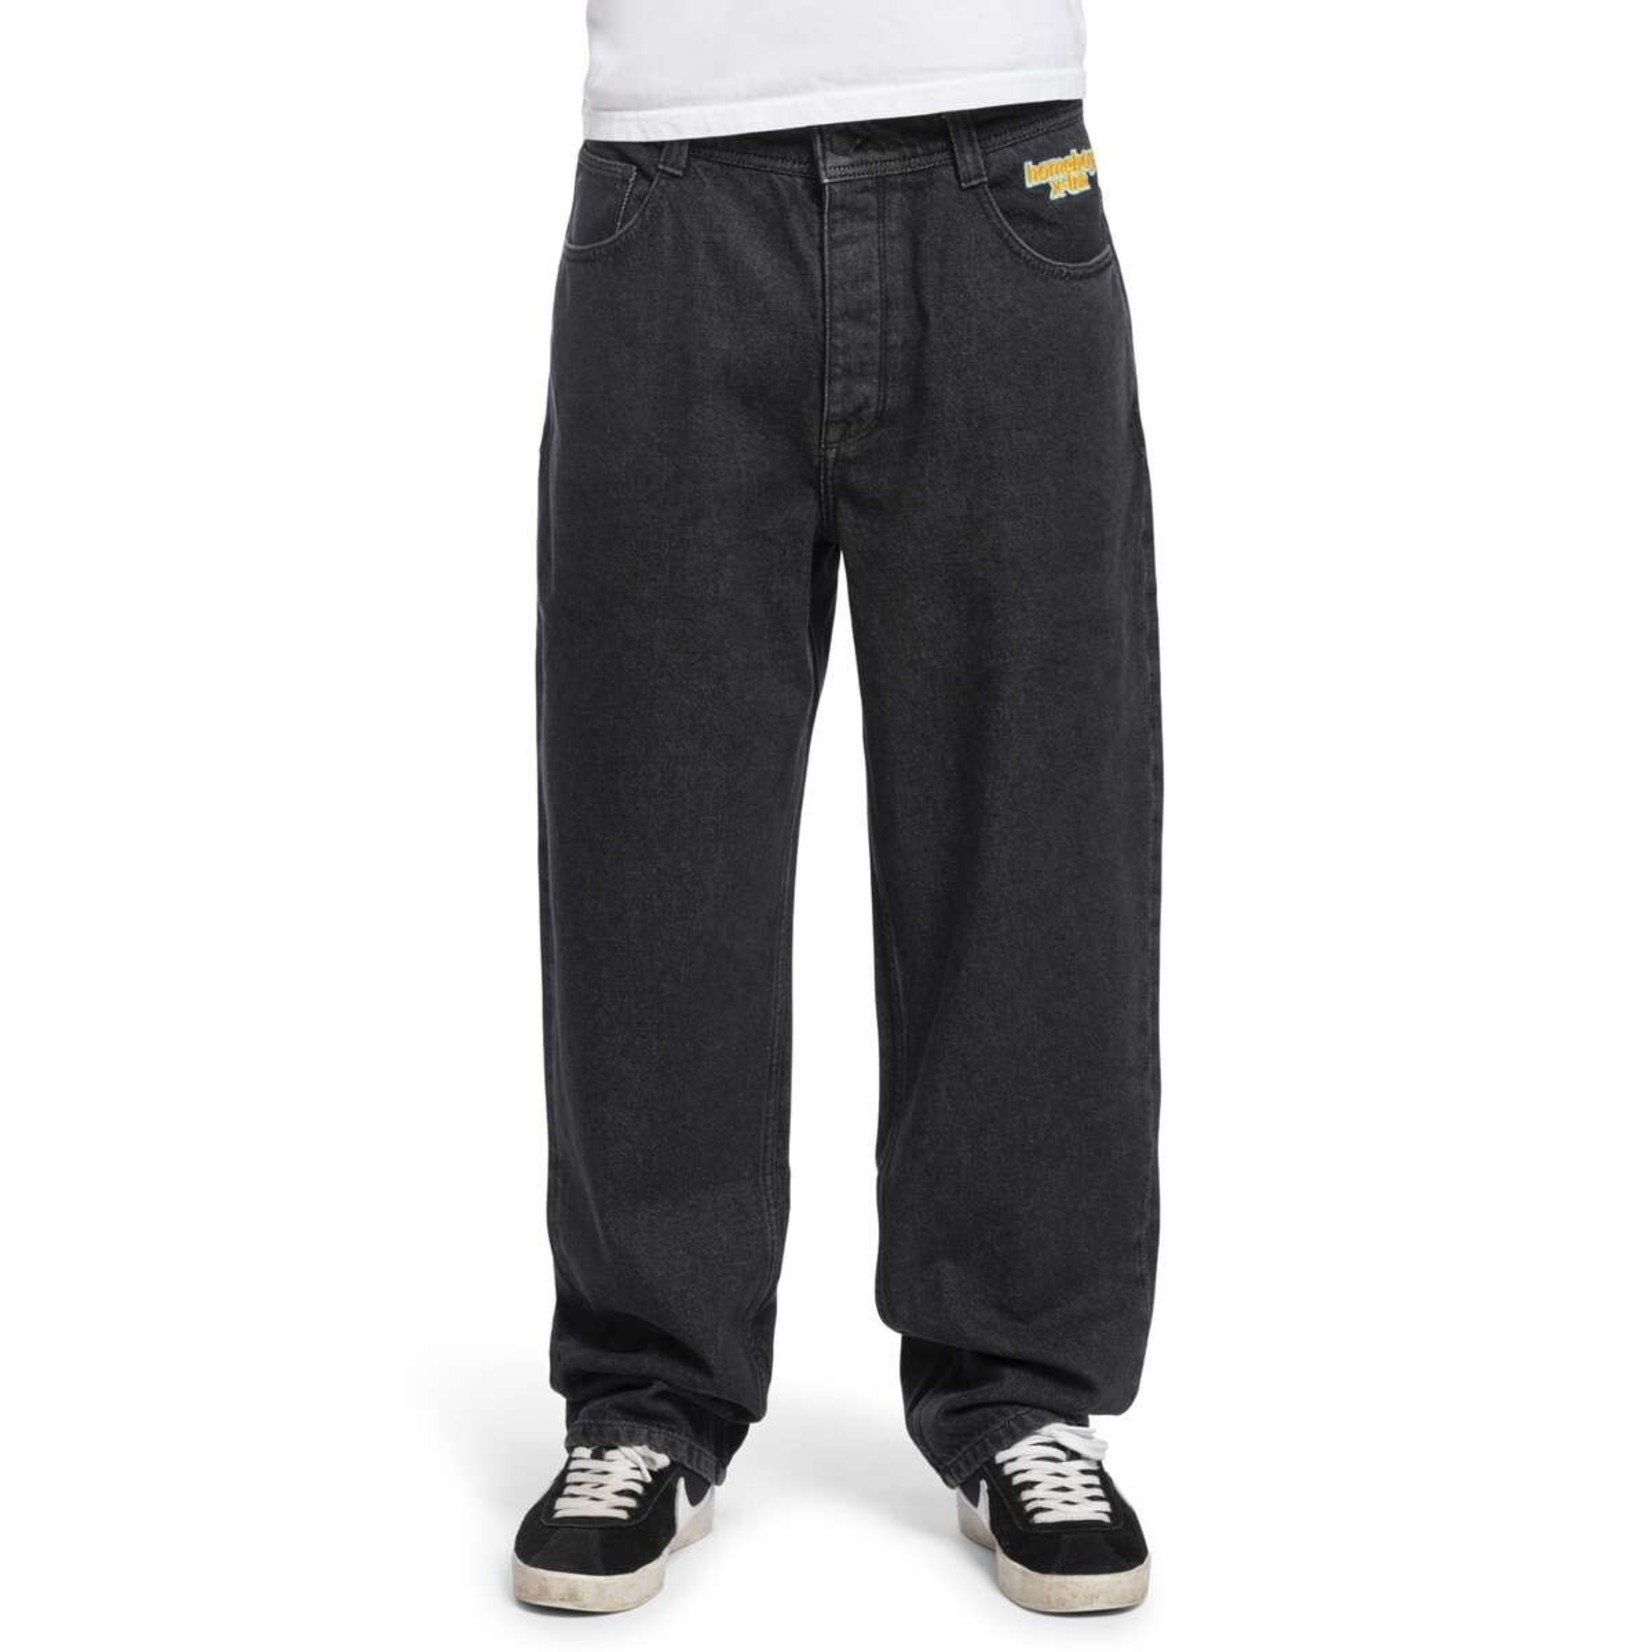 HOMEBOY HOMEBOY X-TRA BAGGY Jeans Washed Black